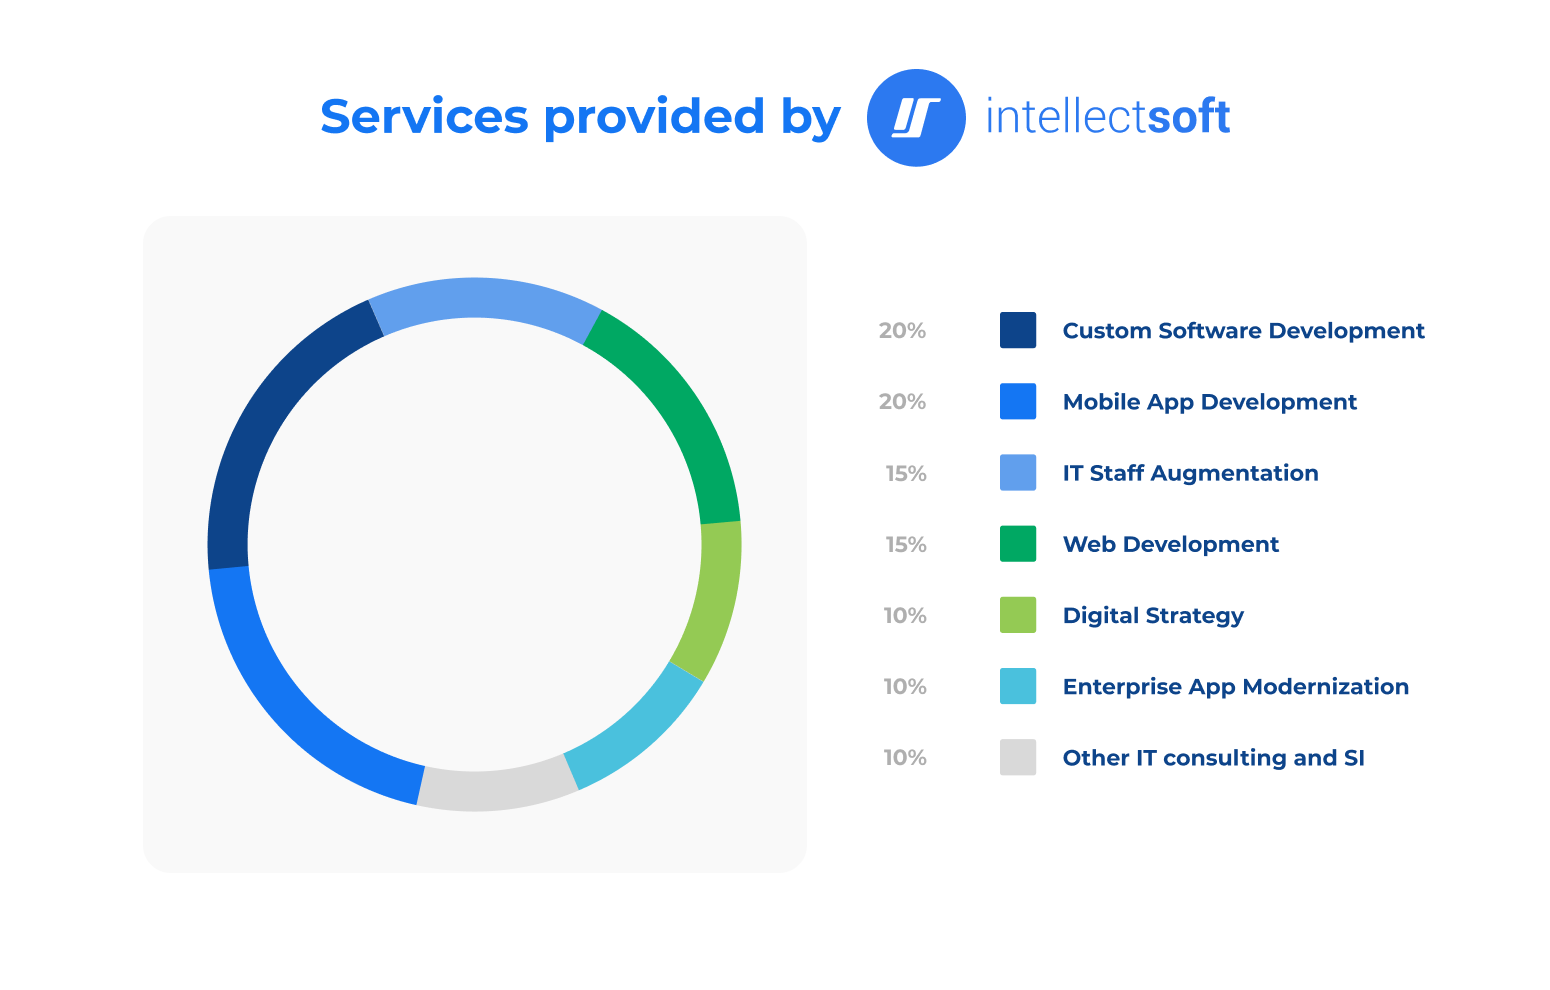 Diagram of services provided by Intellectsoft in percentage terms